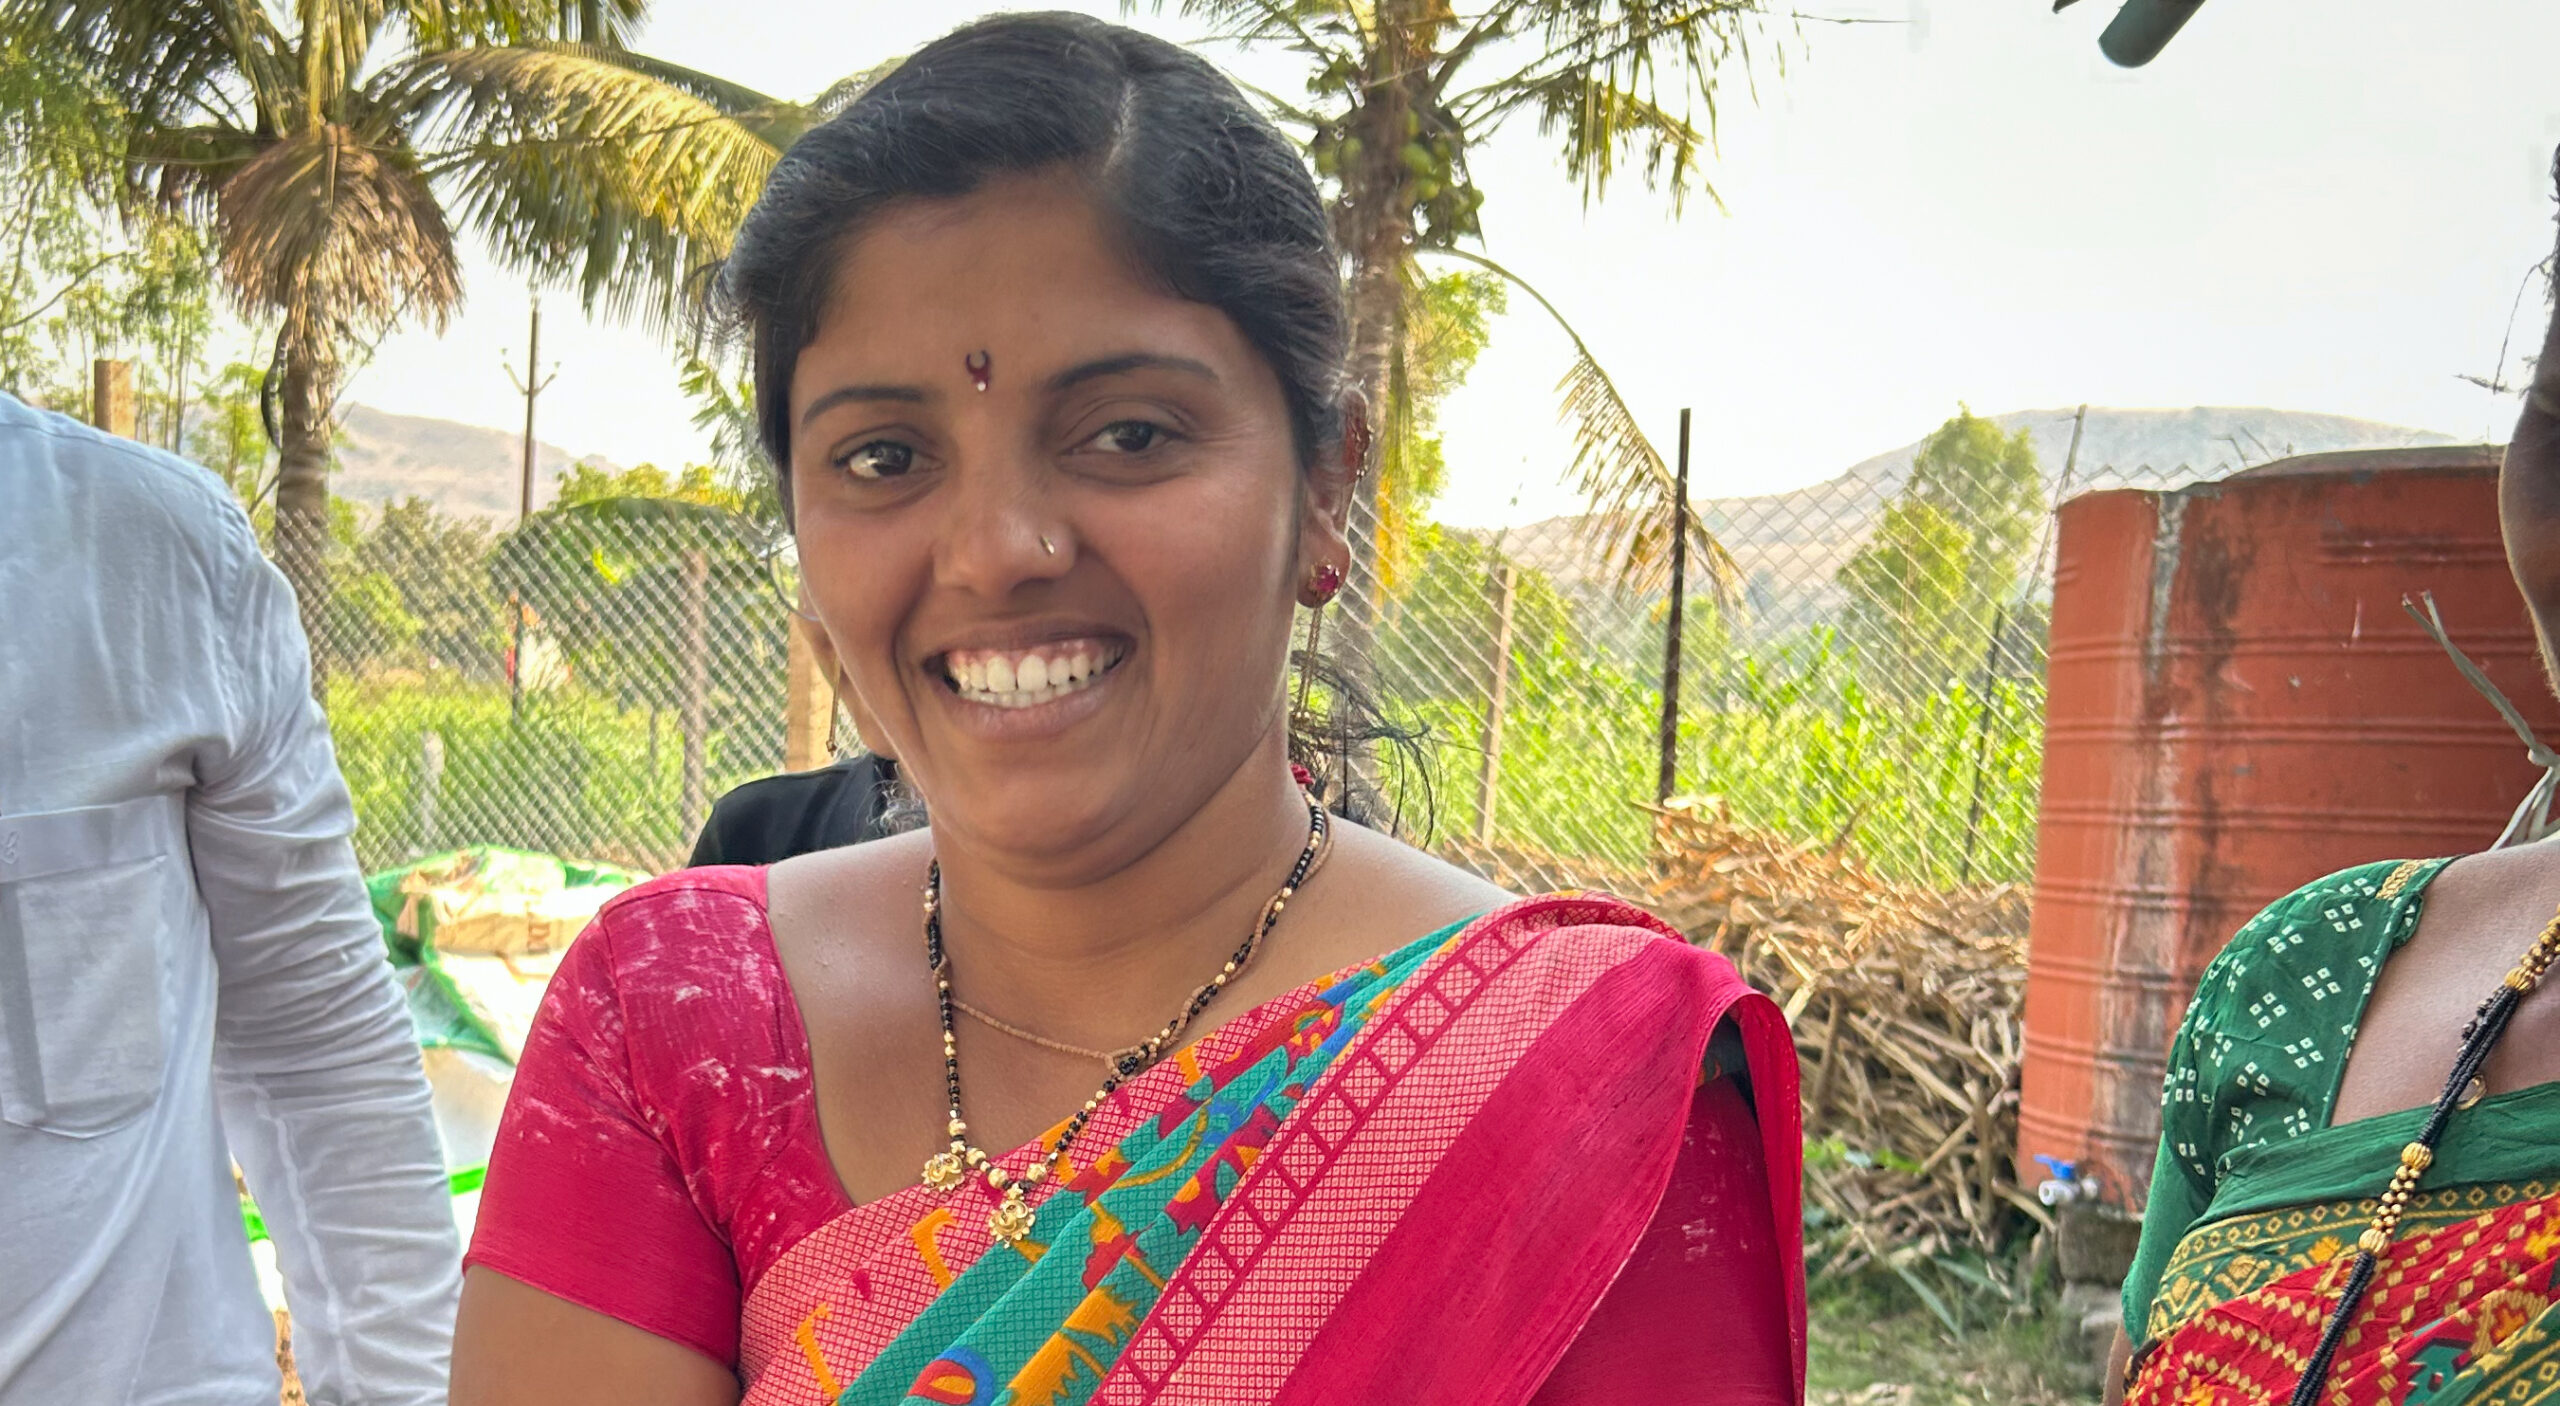 Swati Sanjay Pavale is a small-scale sugarcane farmer in the Maharashtra region of India